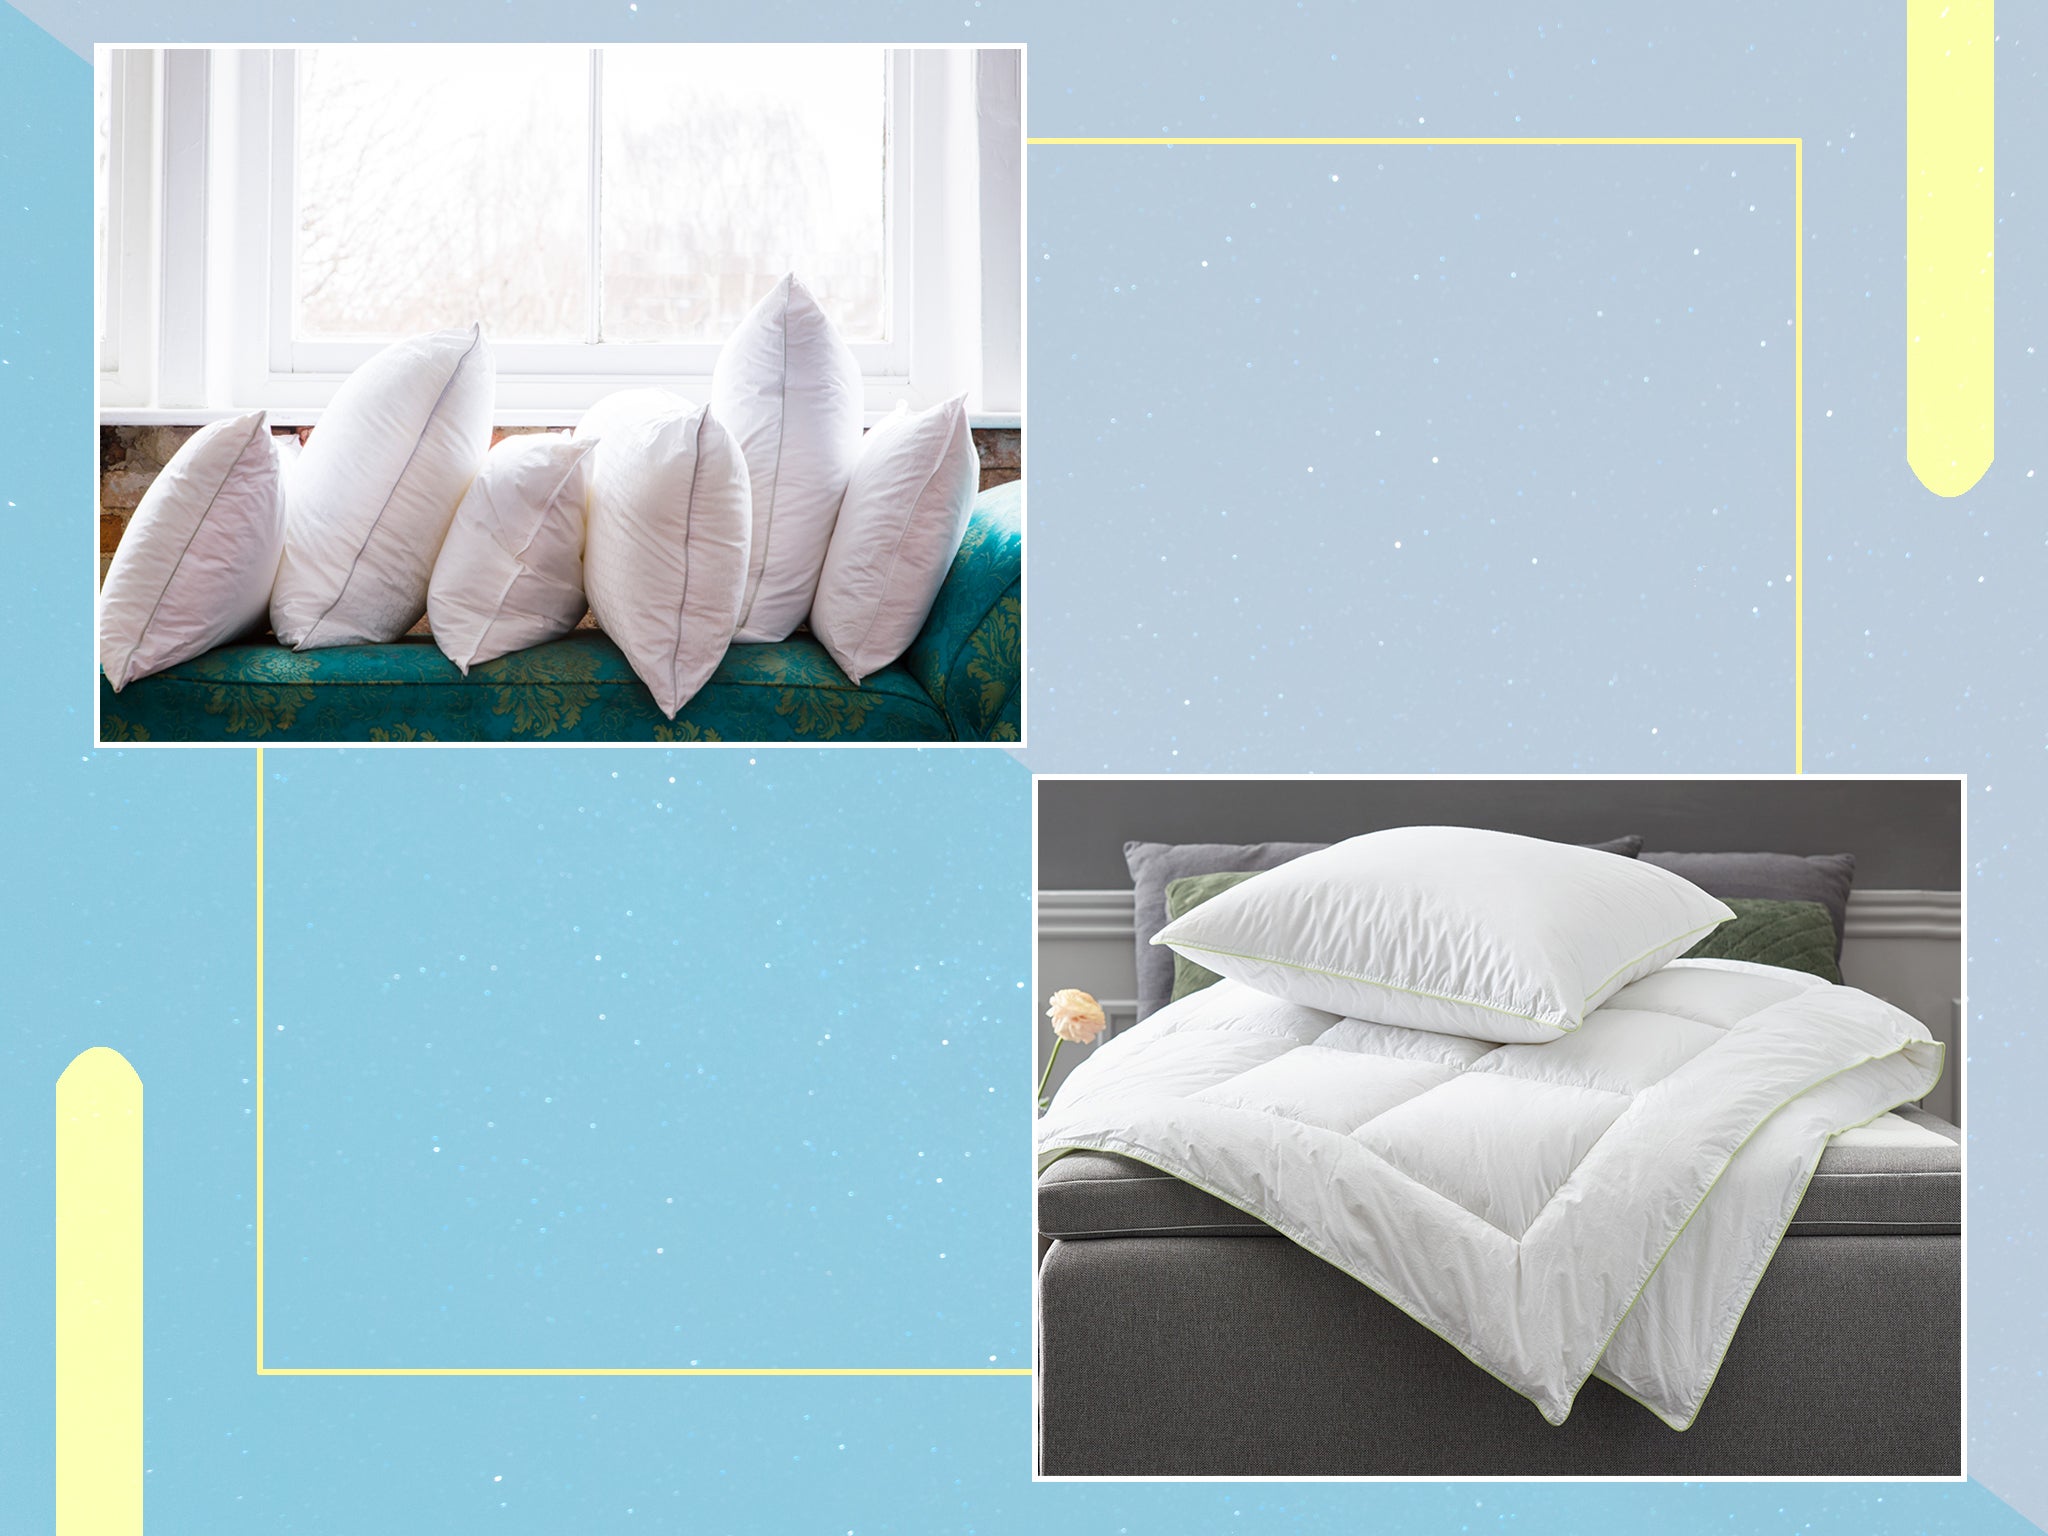 Details about   Home 100%Cotton Feather Down Pillow Waterproof Anti-mite Standard Bedroom case 